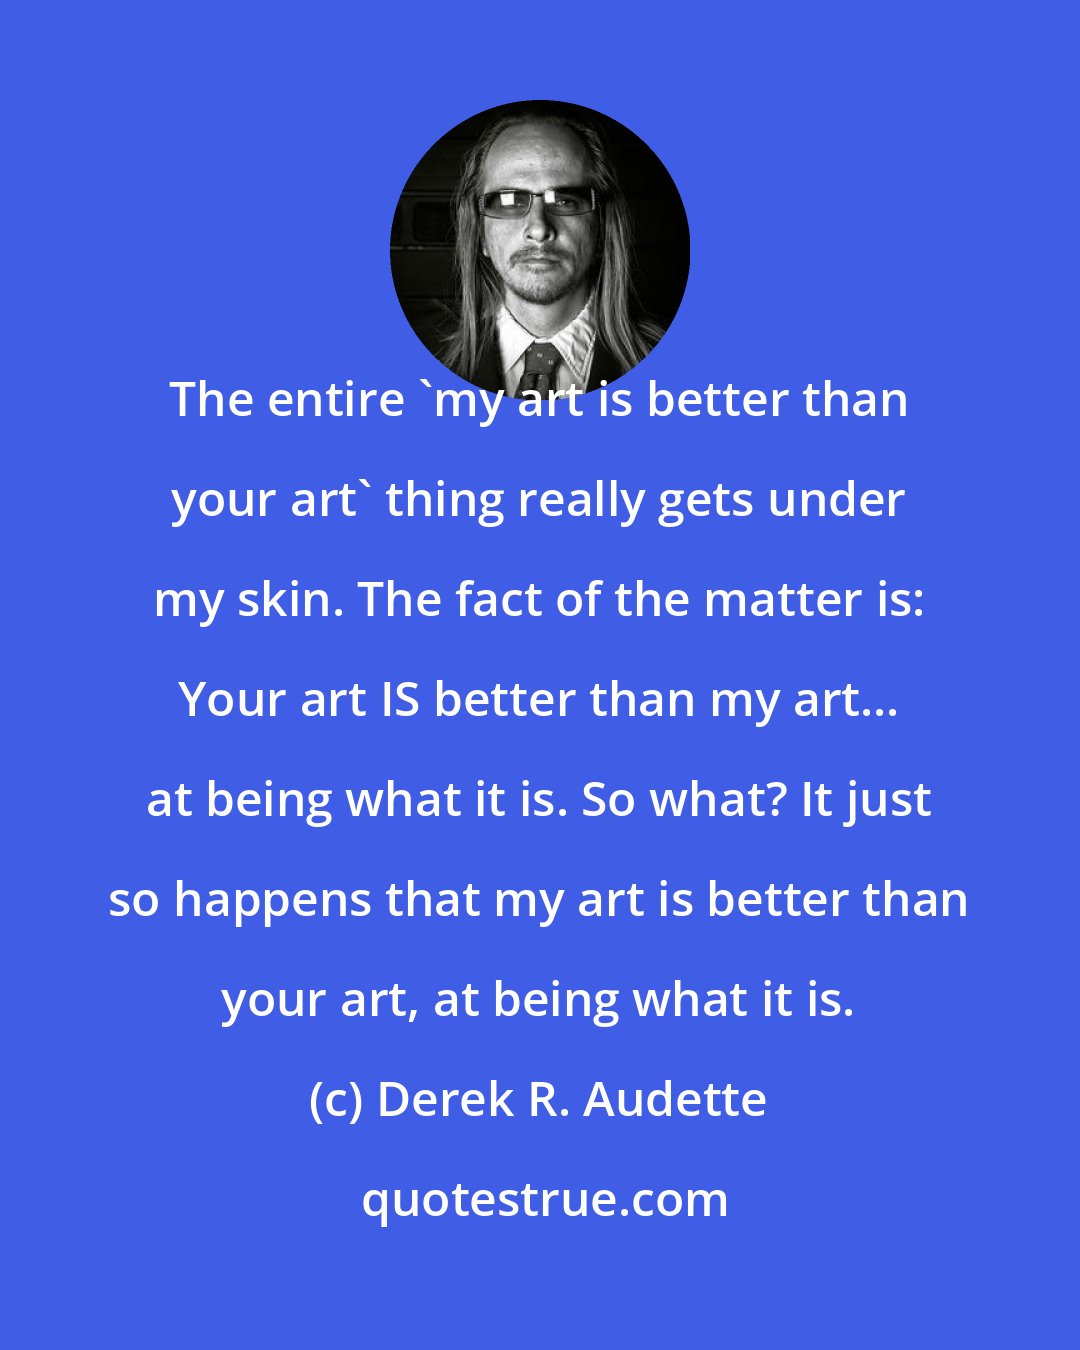 Derek R. Audette: The entire 'my art is better than your art' thing really gets under my skin. The fact of the matter is: Your art IS better than my art... at being what it is. So what? It just so happens that my art is better than your art, at being what it is.